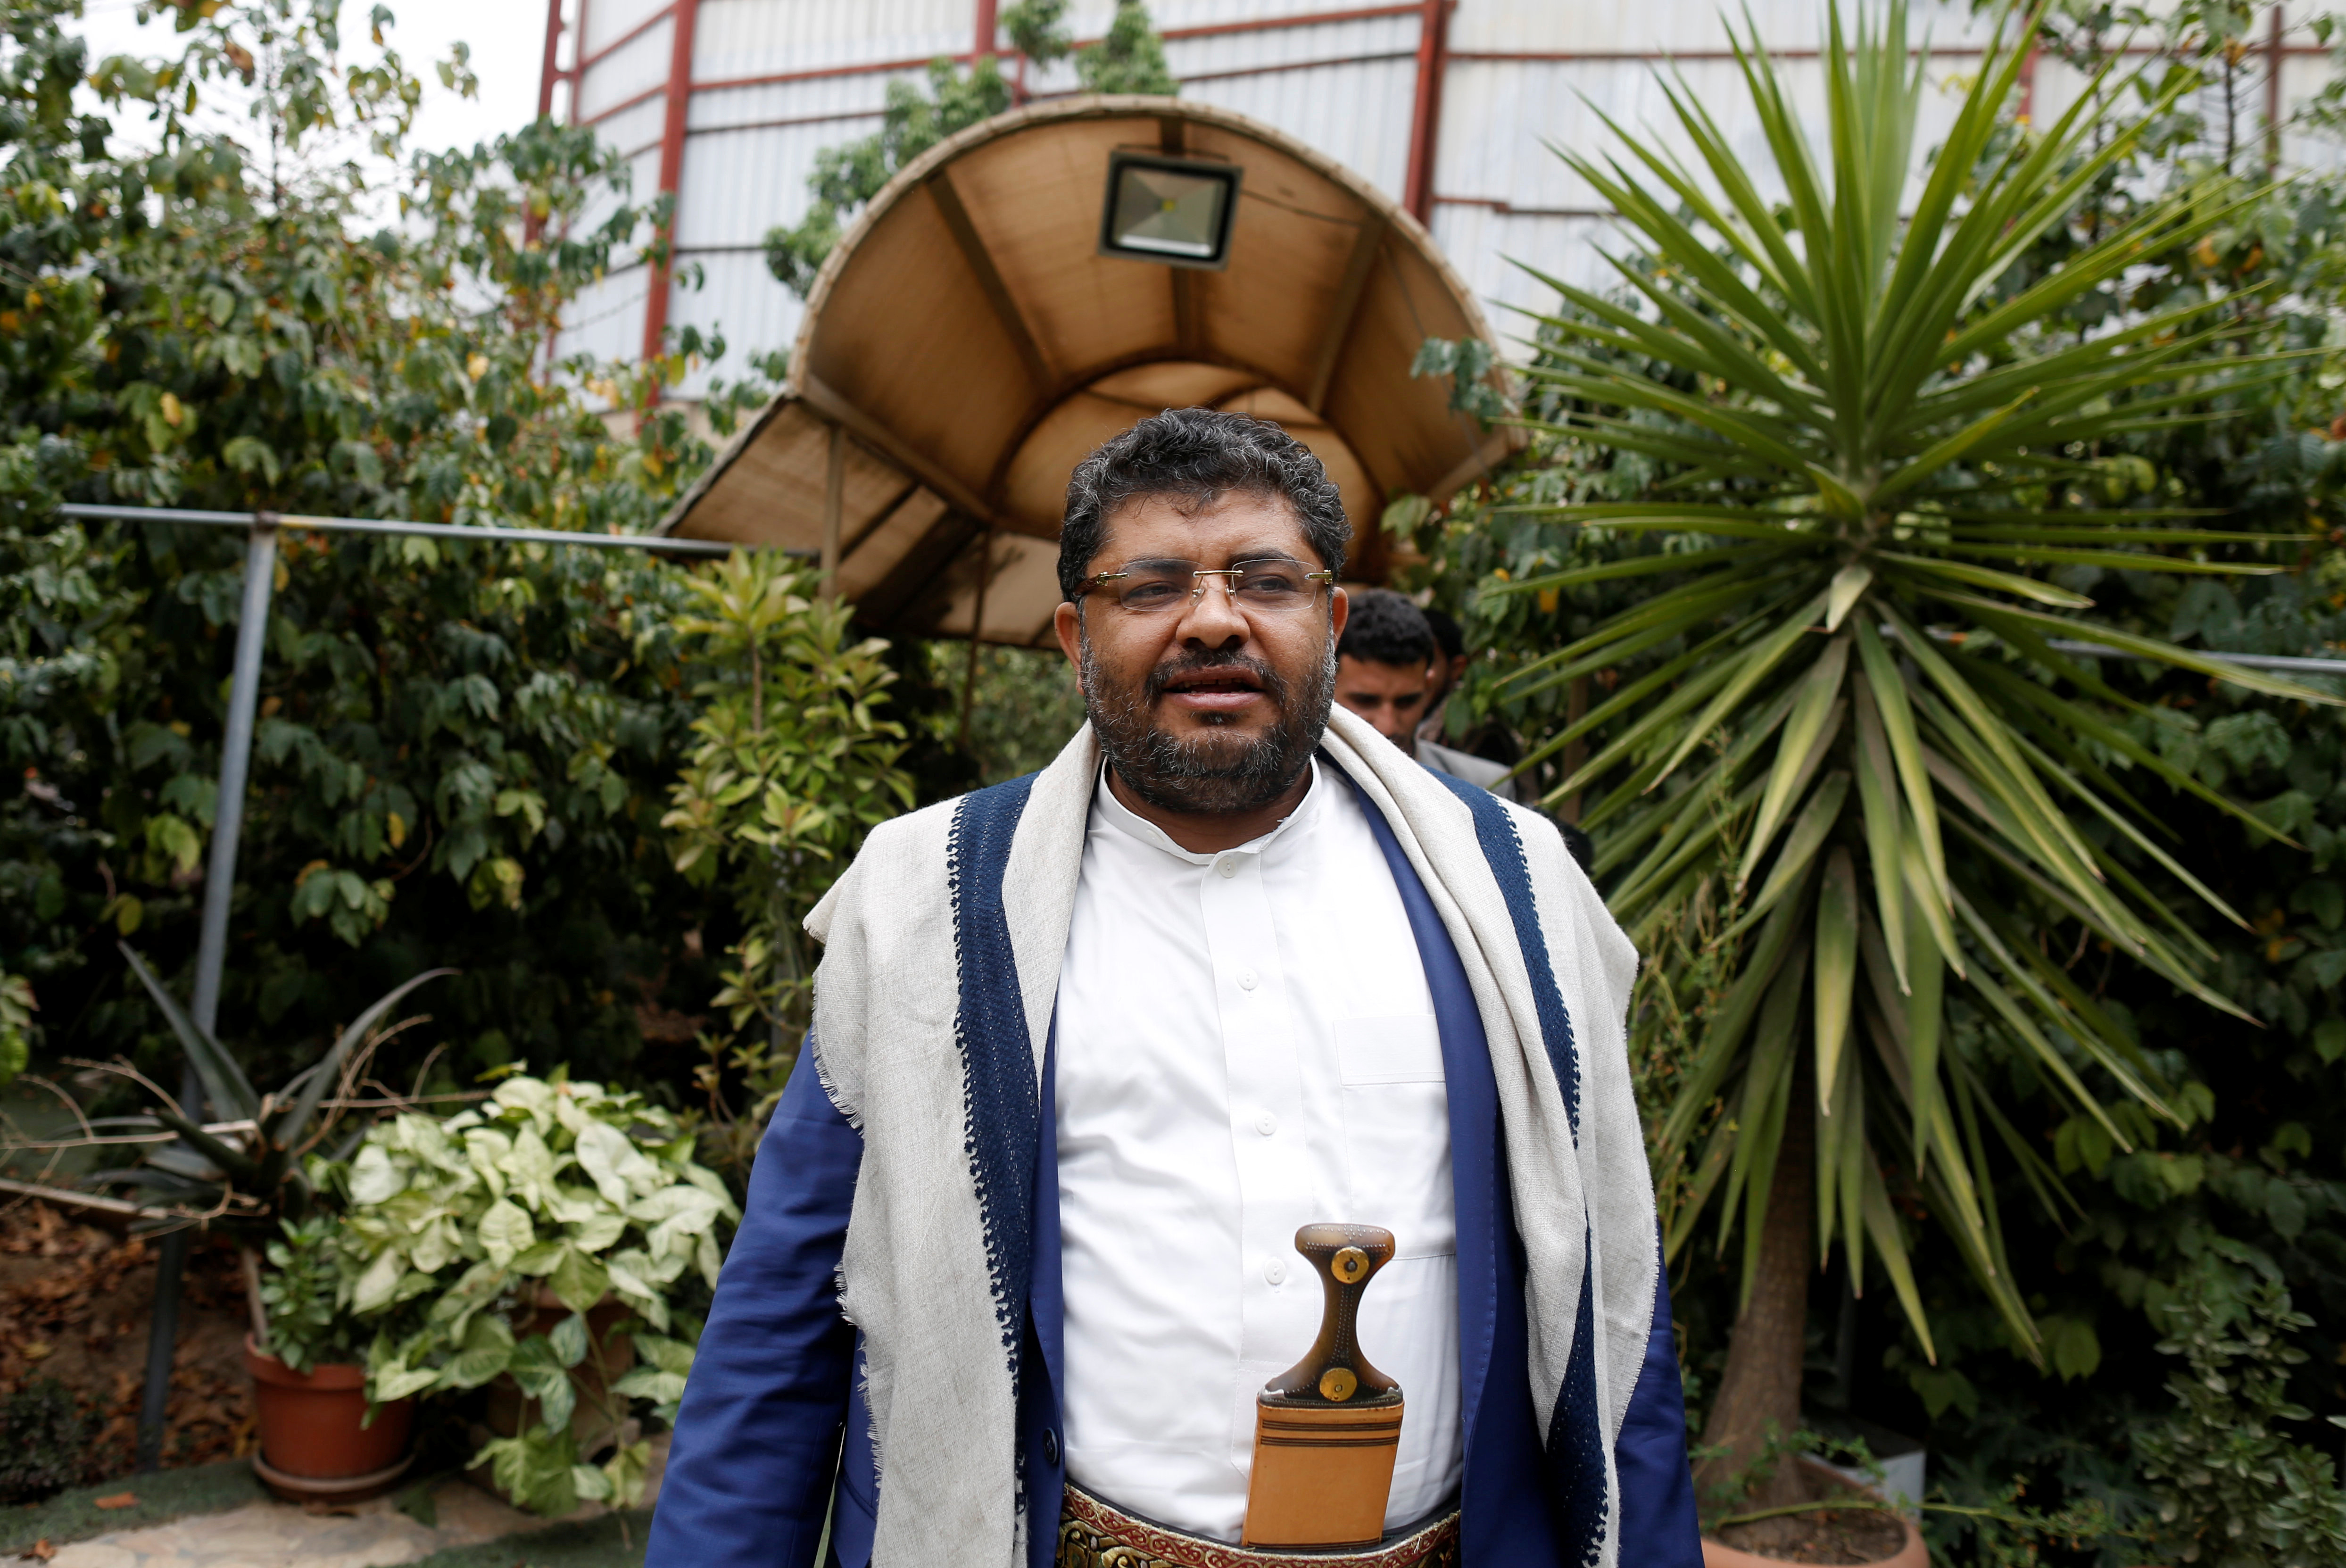 Mohamed Ali al-Houthi, head of the Houthi supreme revolutionary committee, walks after an interview with Reuters in Sanaa